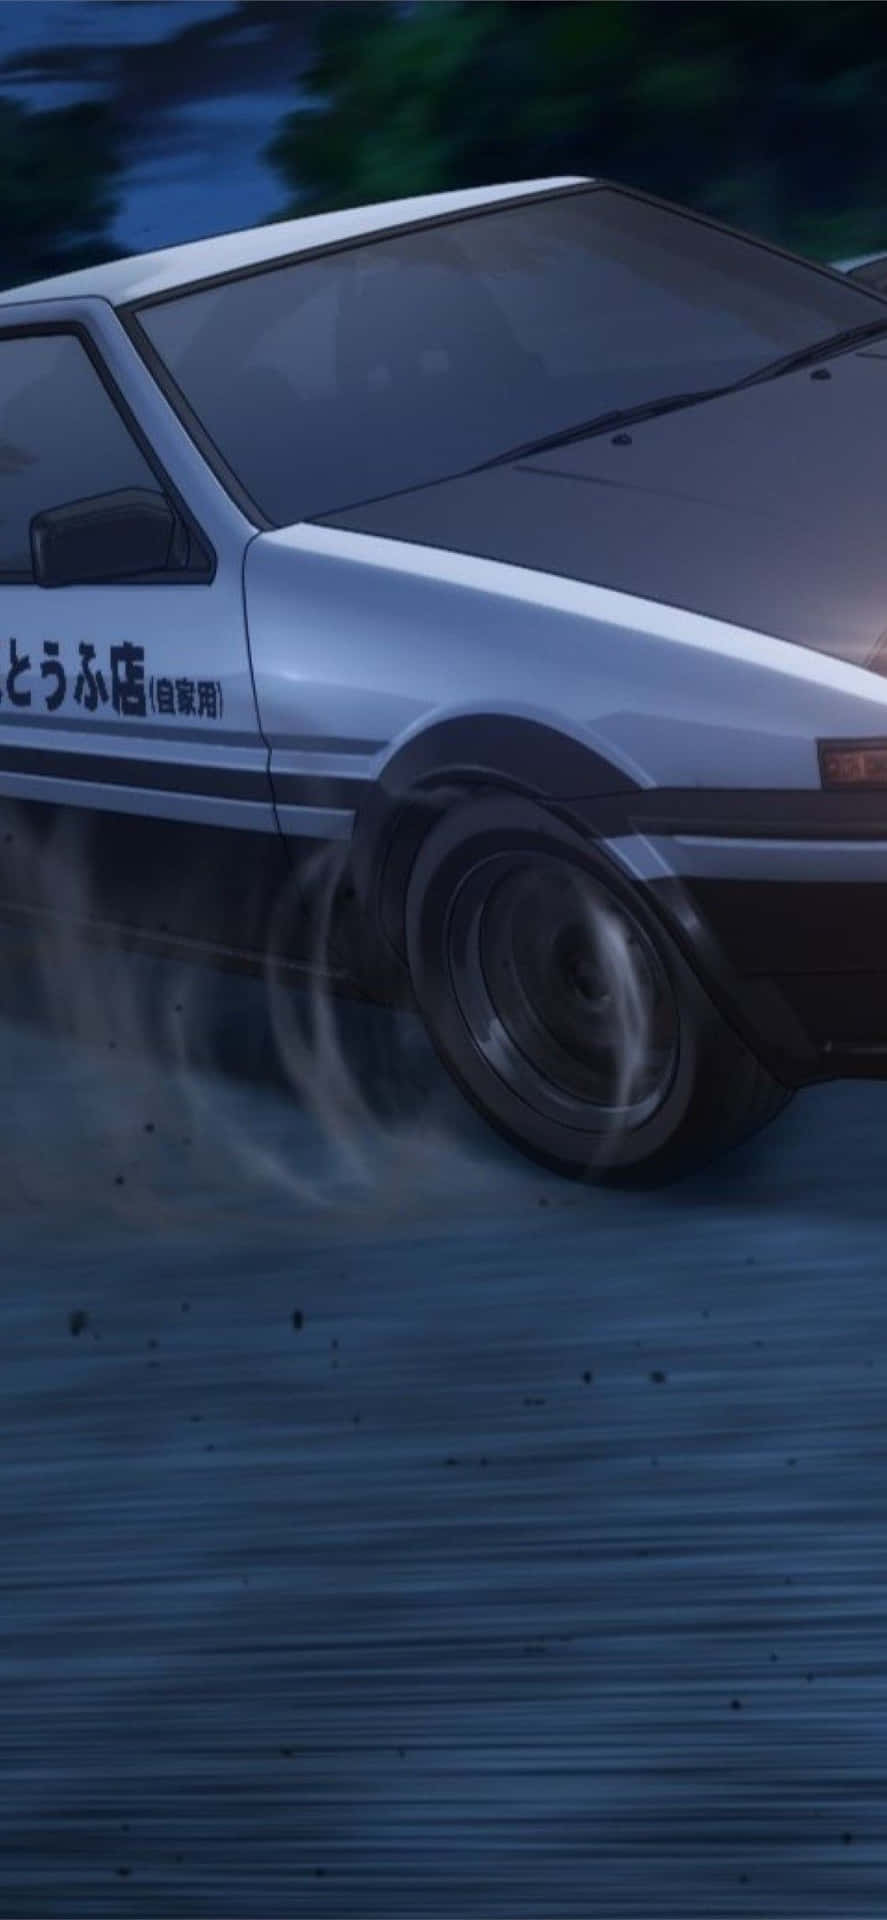 Ae86 - The Iconic Sports Car Wallpaper